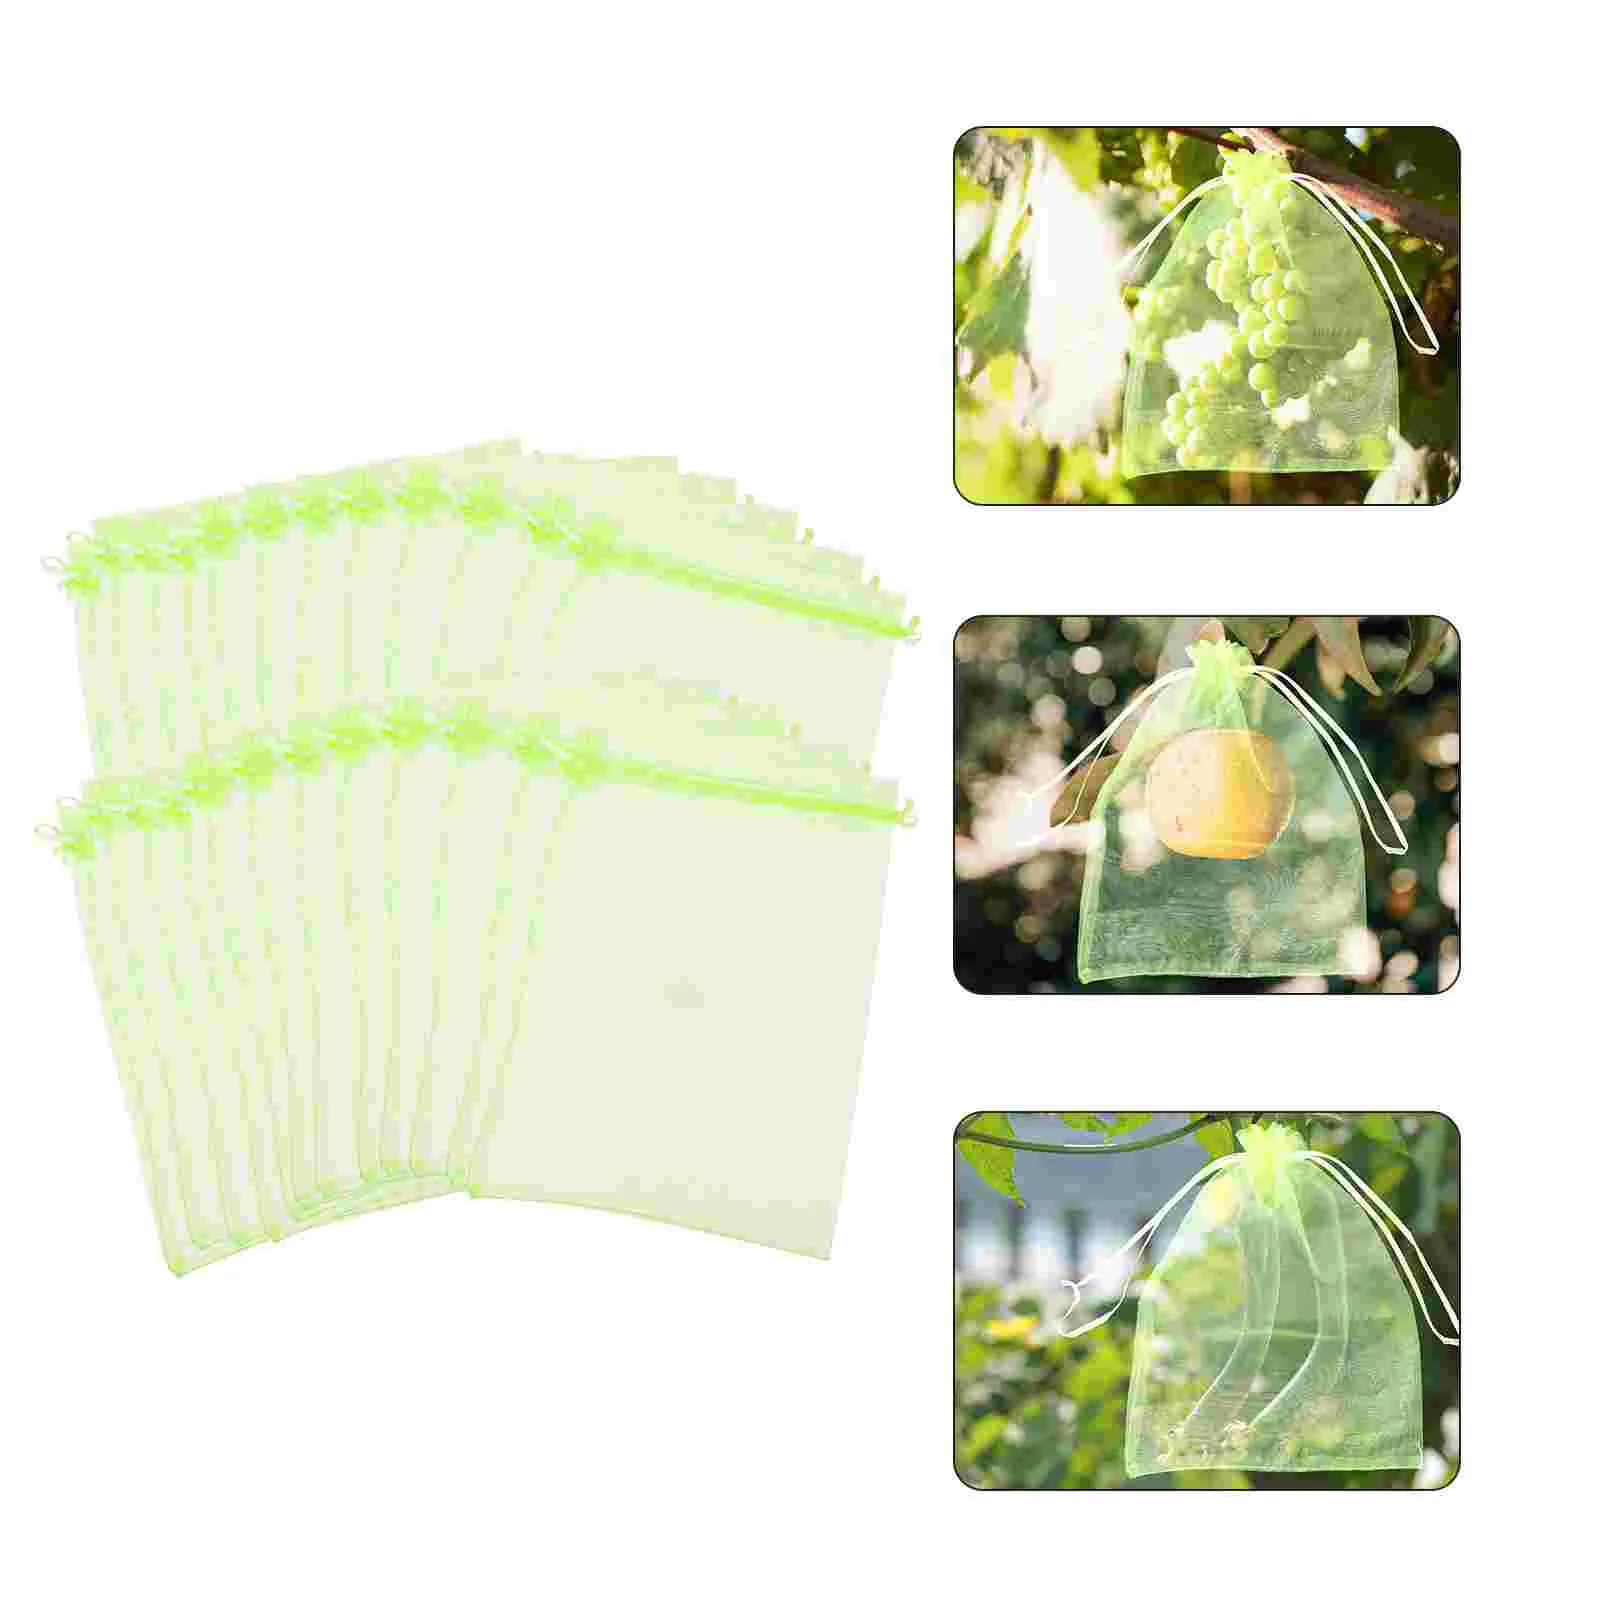 

Fruit Netting Protection Garden Net Mesh Cover Barrier Tree Grape Trees Bird Insect Exclusion Mango Fine Bugs Drawstring Nylon